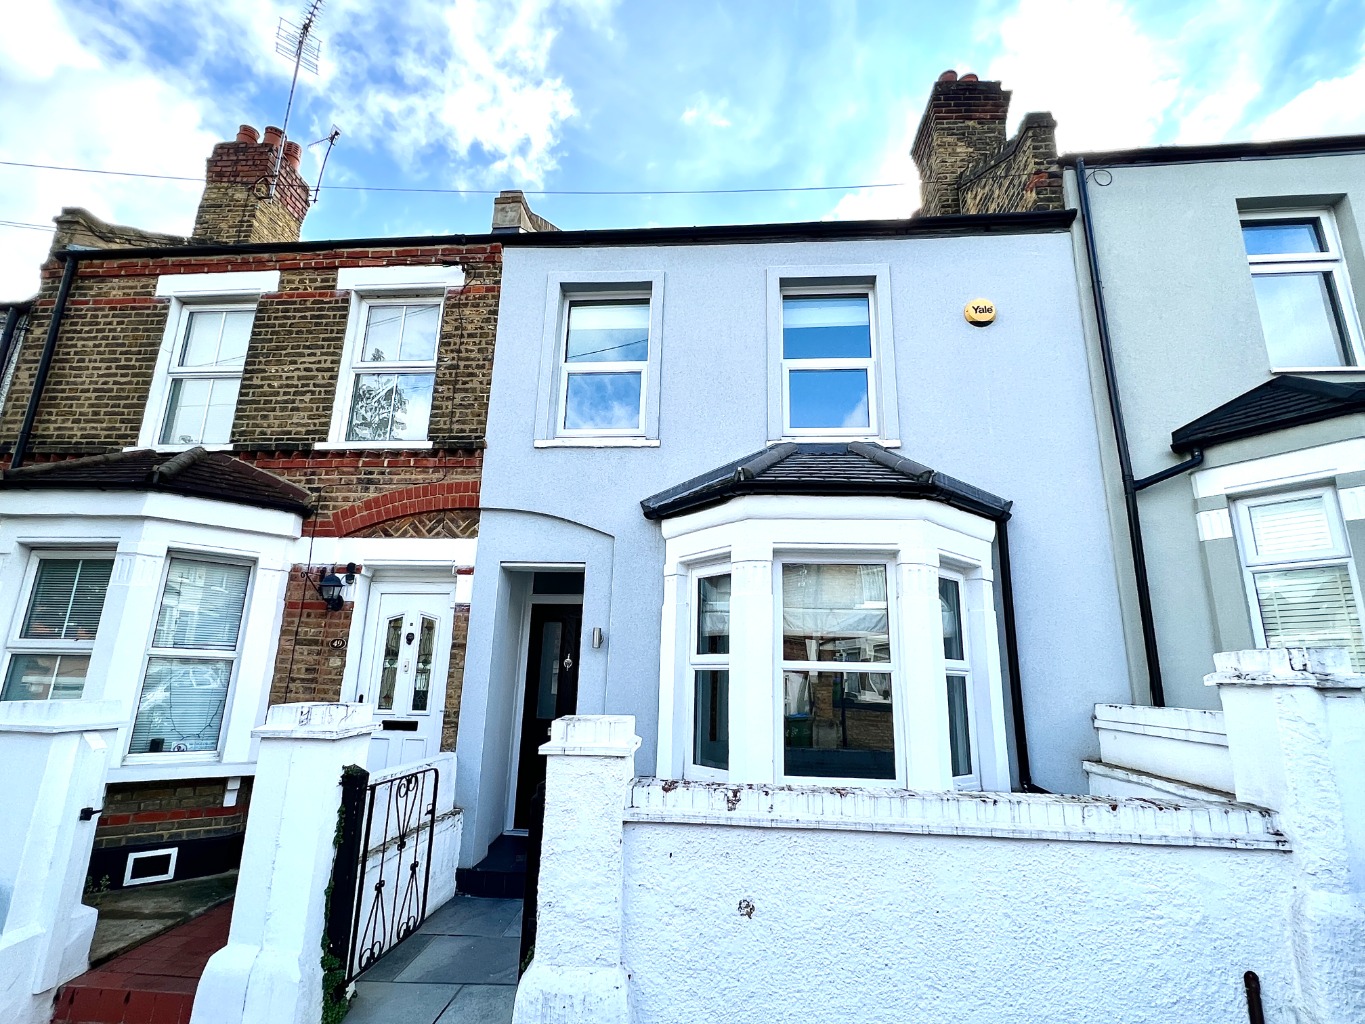 2 bed terraced house to rent - Property Image 1